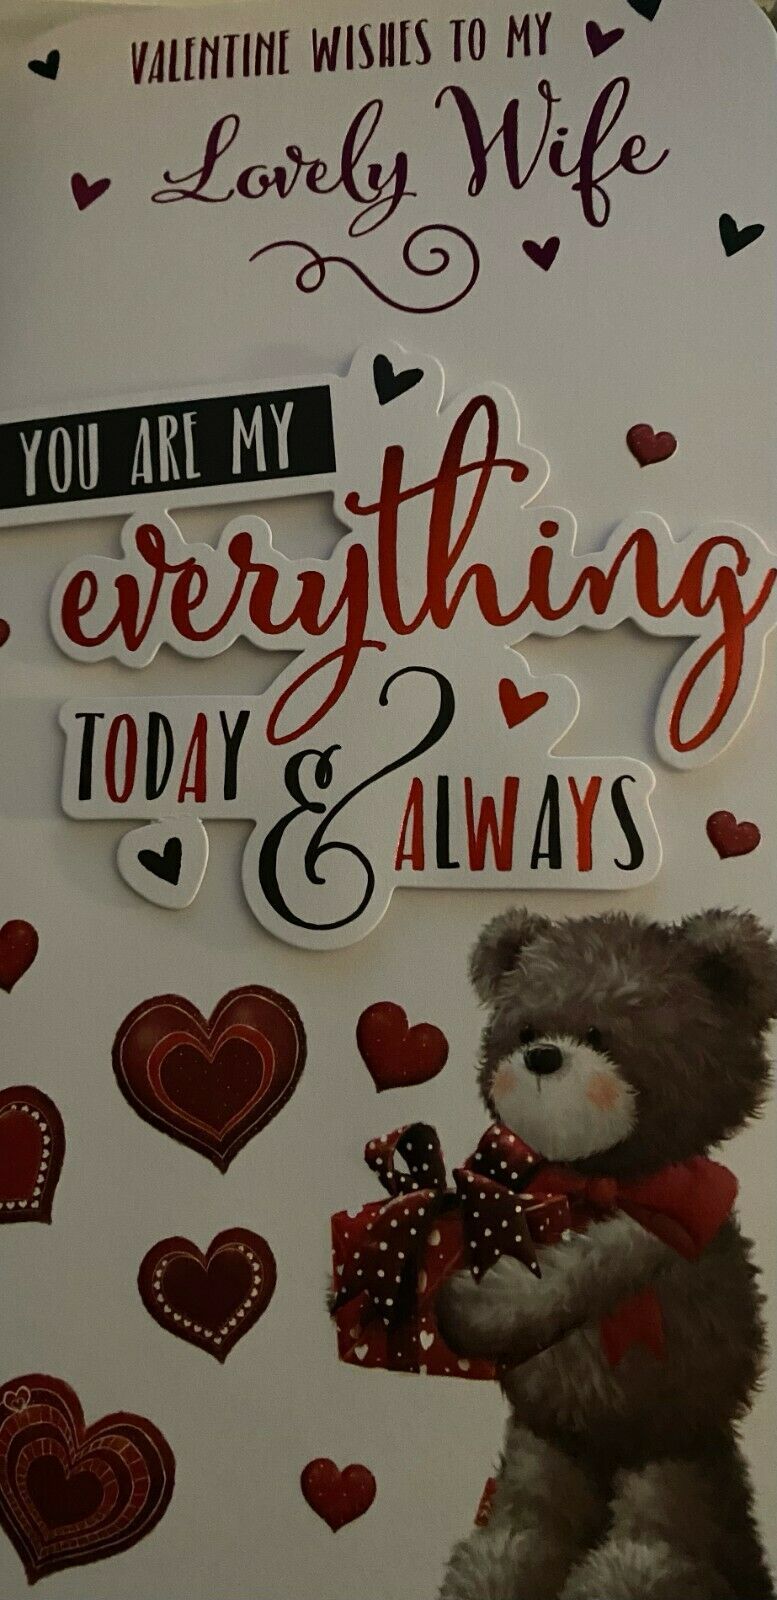 Valentine's Day Card To My Lovely Wife - You Are My Everything Today & Alwa